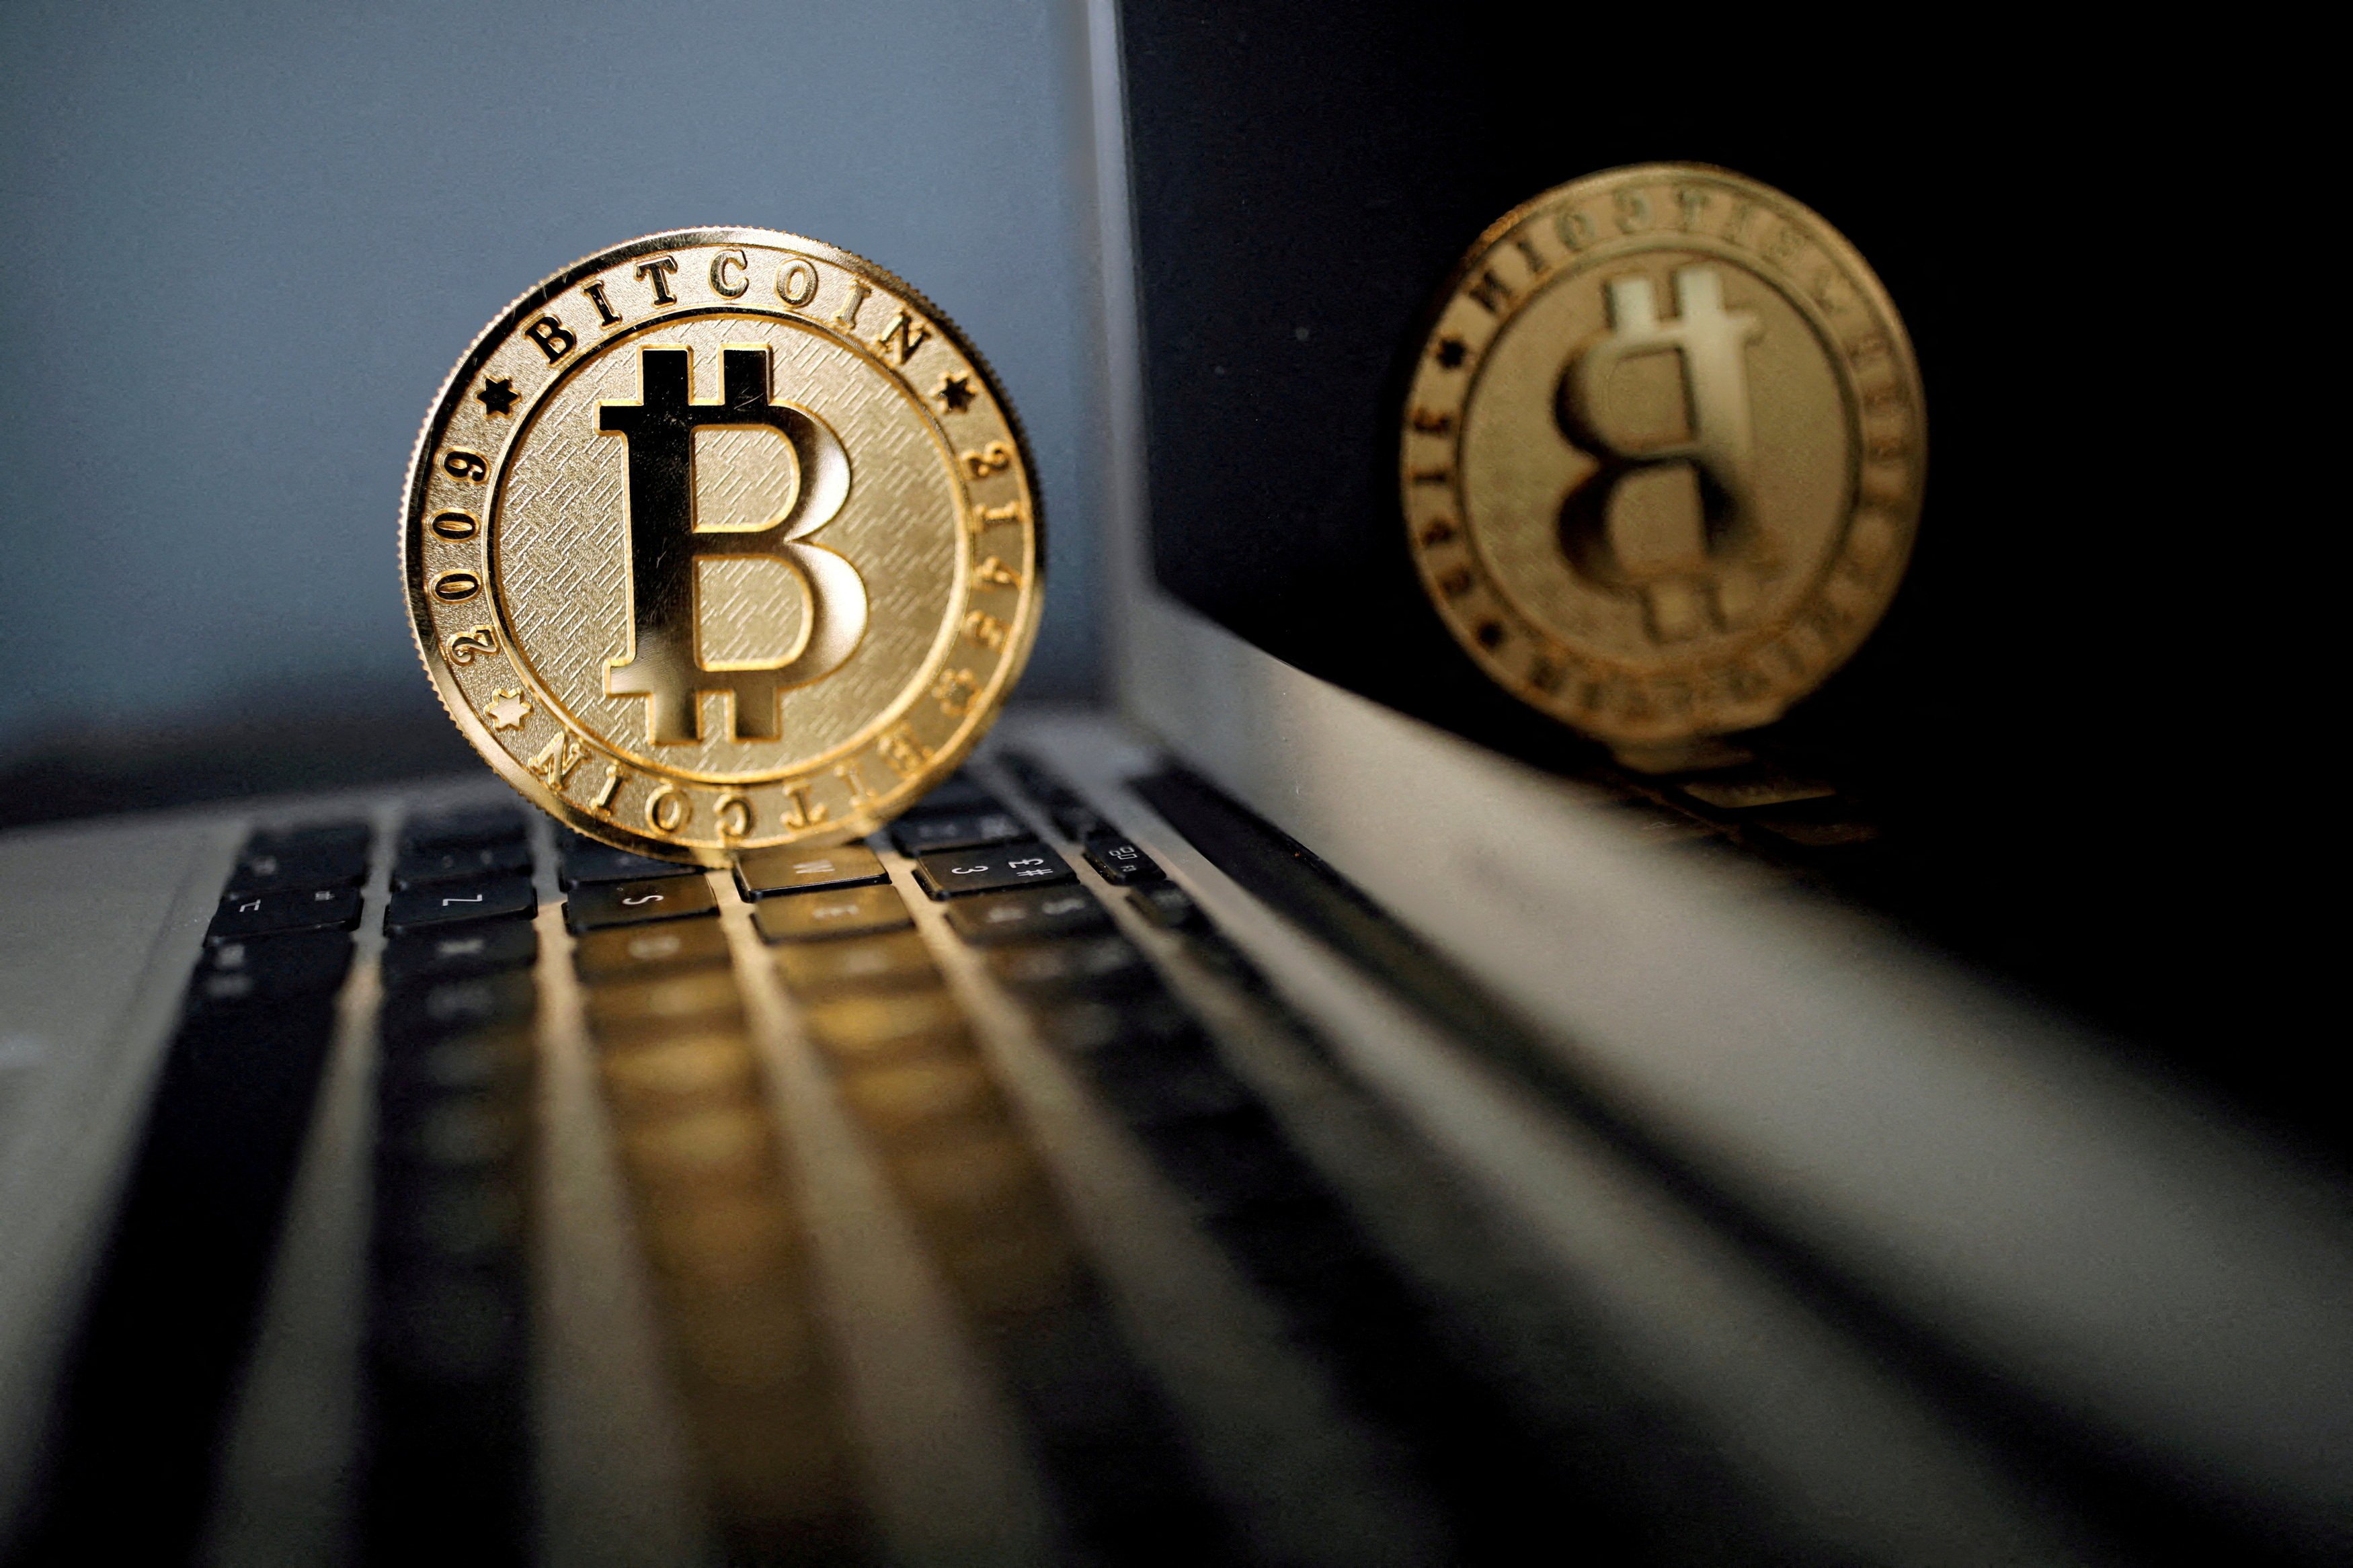 A Beijing-based equity exchange clarified that it has nothing to do with cryptocurrency after it found an overseas company sharing its initials CBEX. Photo: Reuters